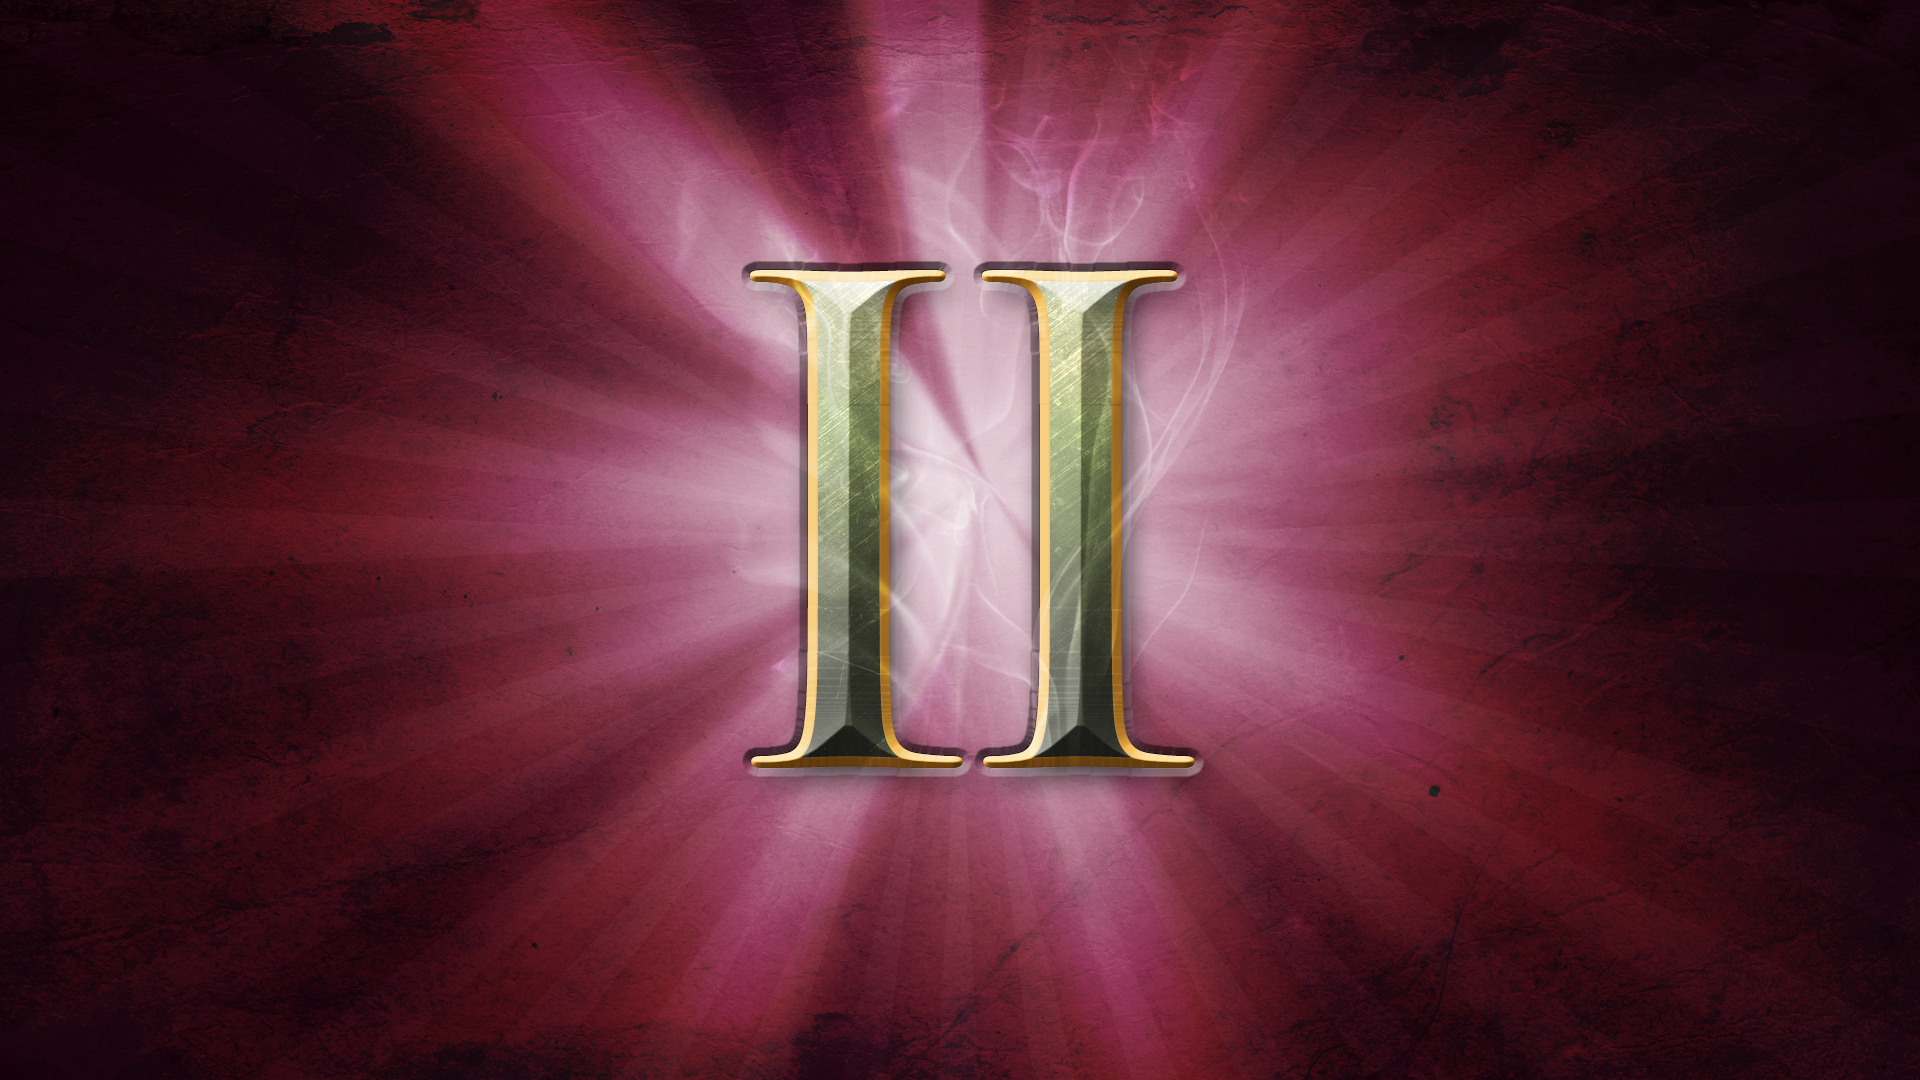 Icon for Act 2 completion